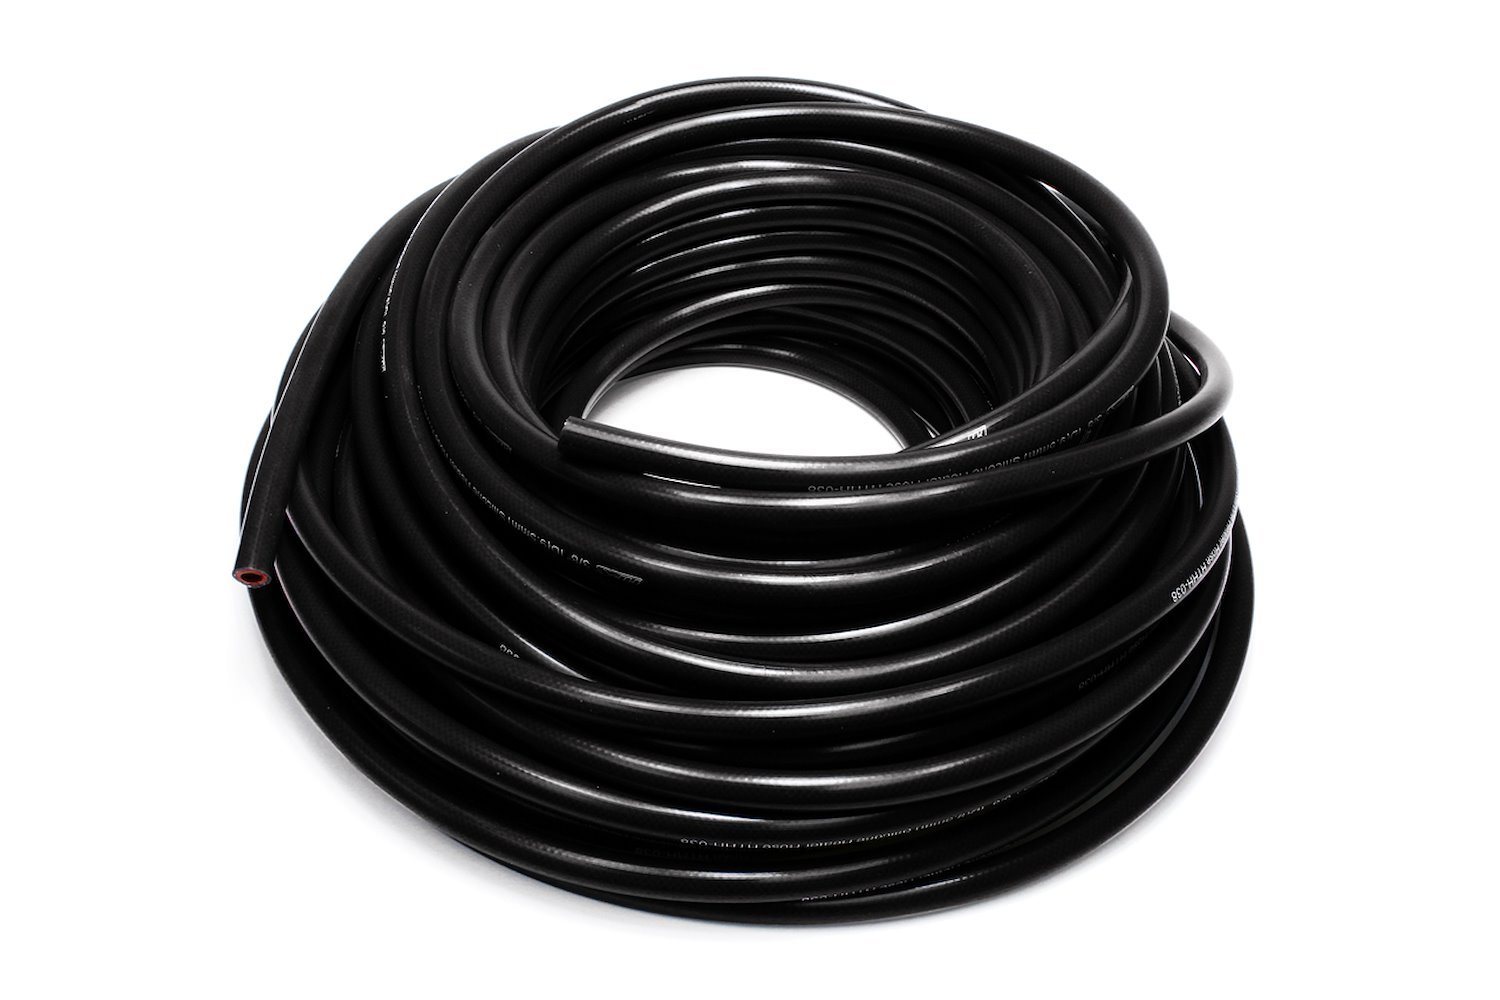 HTHH-062-BLKx250 Silicone Heater Hose Tubing, High-Temp Reinforced, 5/8 in. ID, 250 ft. Roll, Black